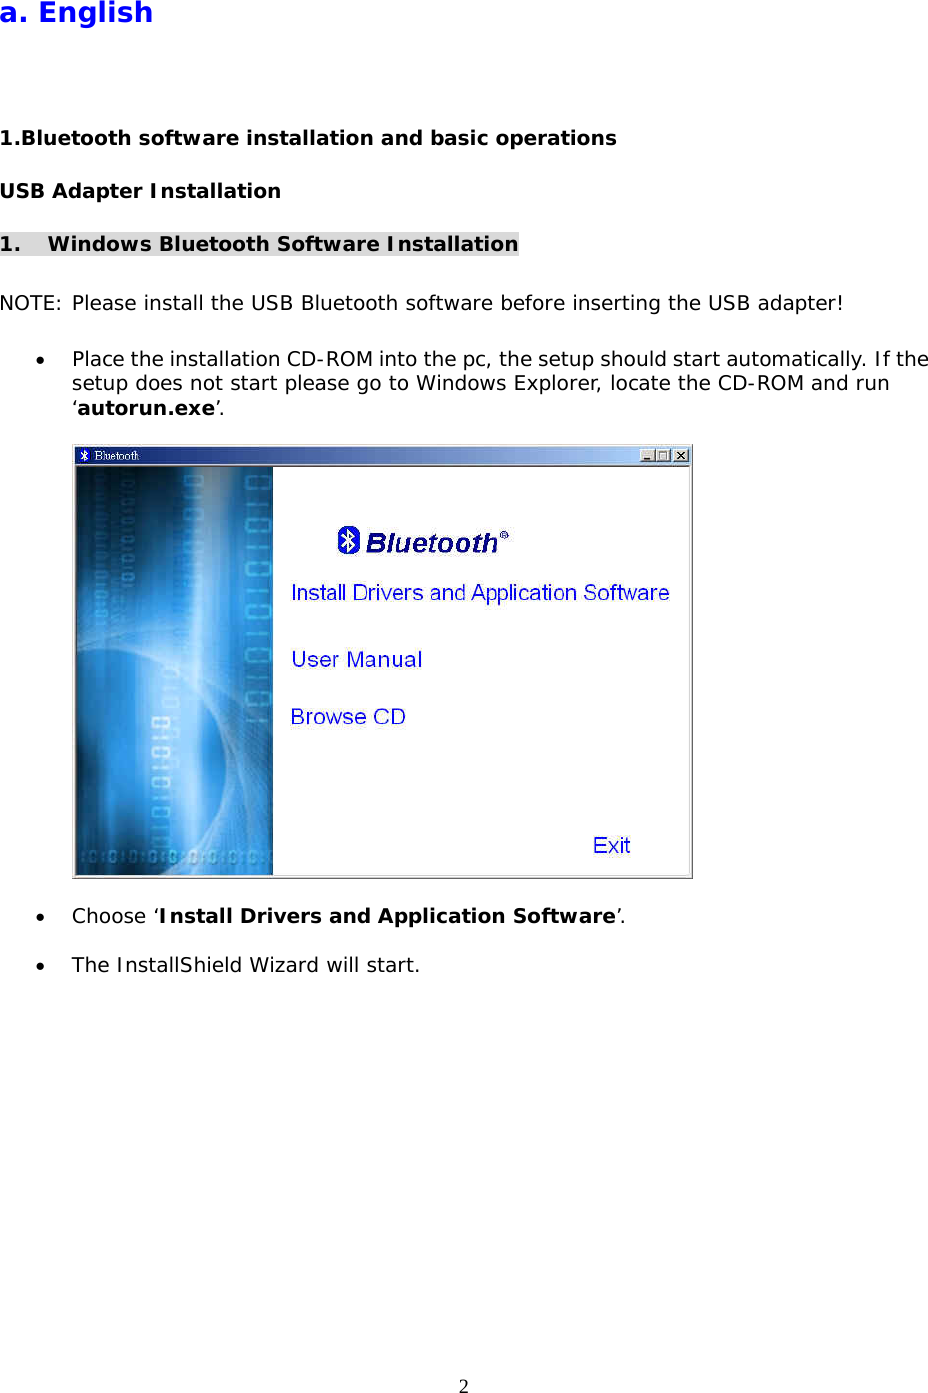 2 a. English 1.Bluetooth software installation and basic operations USB Adapter Installation 1. Windows Bluetooth Software Installation  NOTE: Please install the USB Bluetooth software before inserting the USB adapter!  •  Place the installation CD-ROM into the pc, the setup should start automatically. If the setup does not start please go to Windows Explorer, locate the CD-ROM and run ‘autorun.exe’.    •  Choose ‘Install Drivers and Application Software’.  •  The InstallShield Wizard will start. 